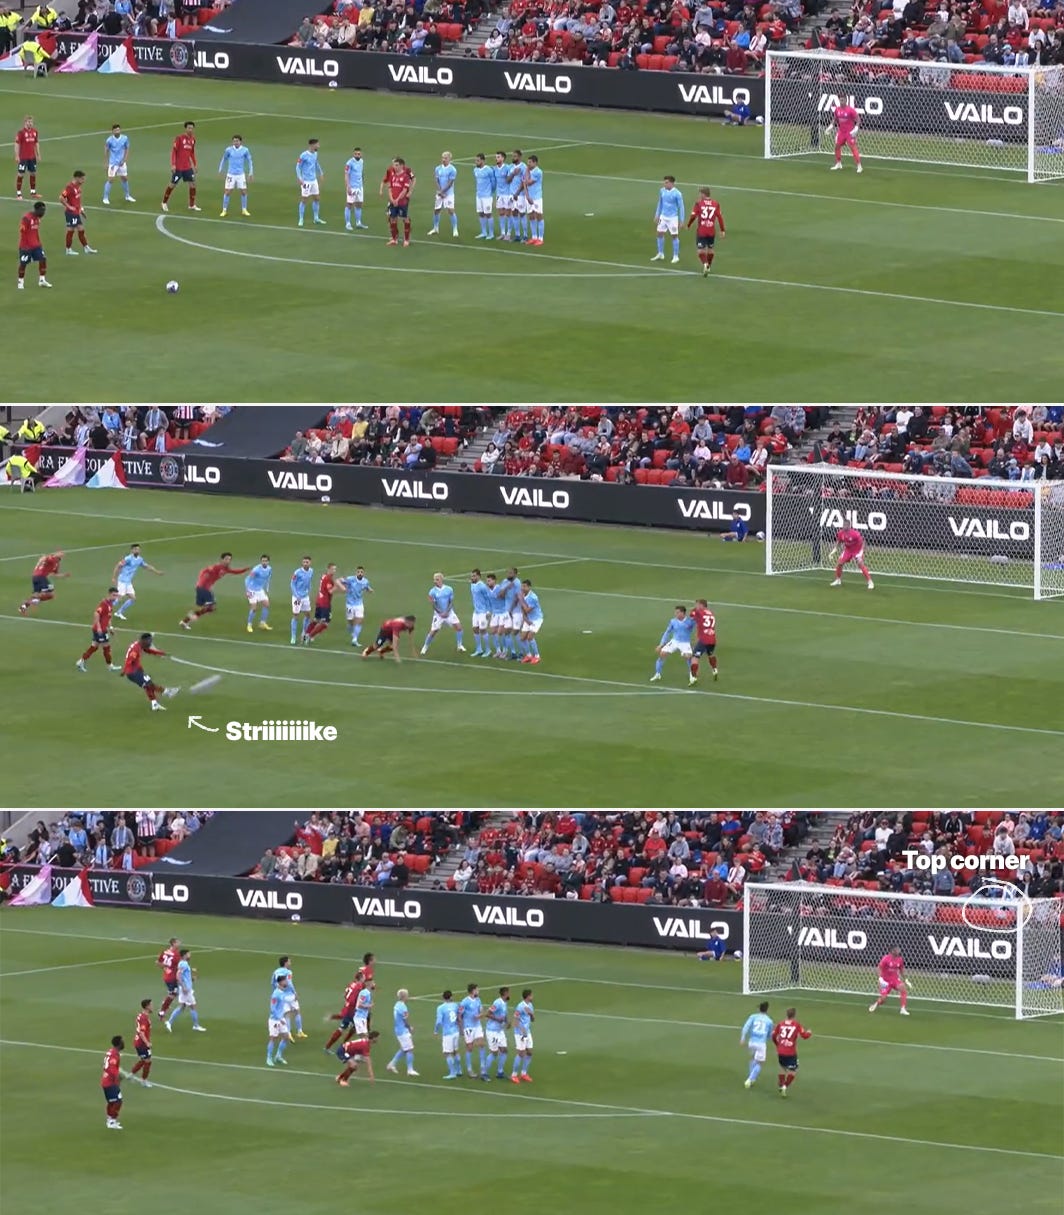 A sequence of screenshots showing Nestory Irankunda's ensational free-kick goal against Melbourne City in the A-League.